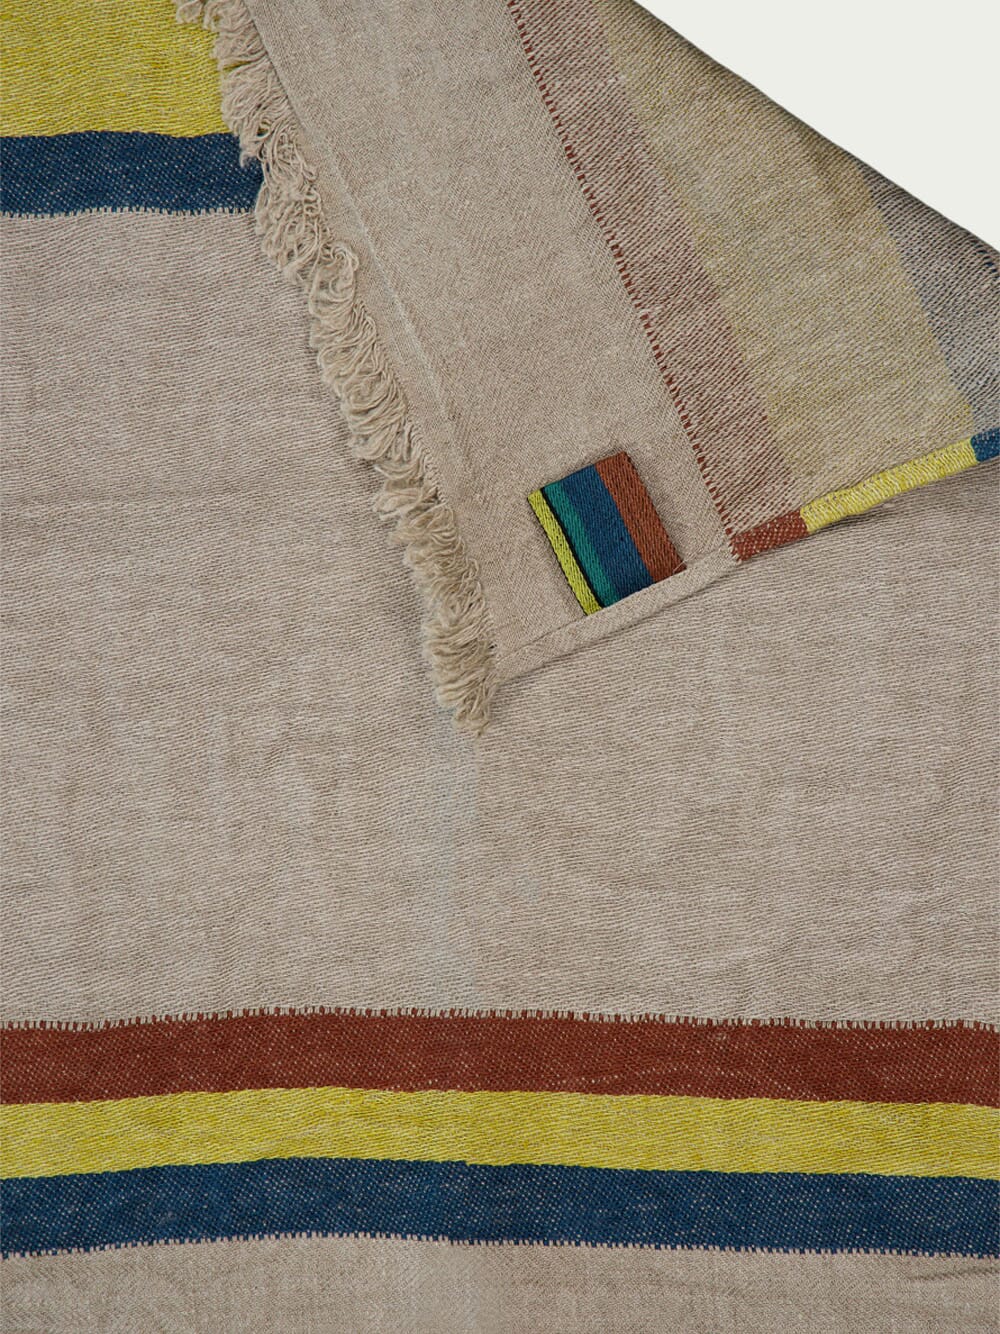 LibecoThe Belgian Guest Multicolour Towel at Fashion Clinic